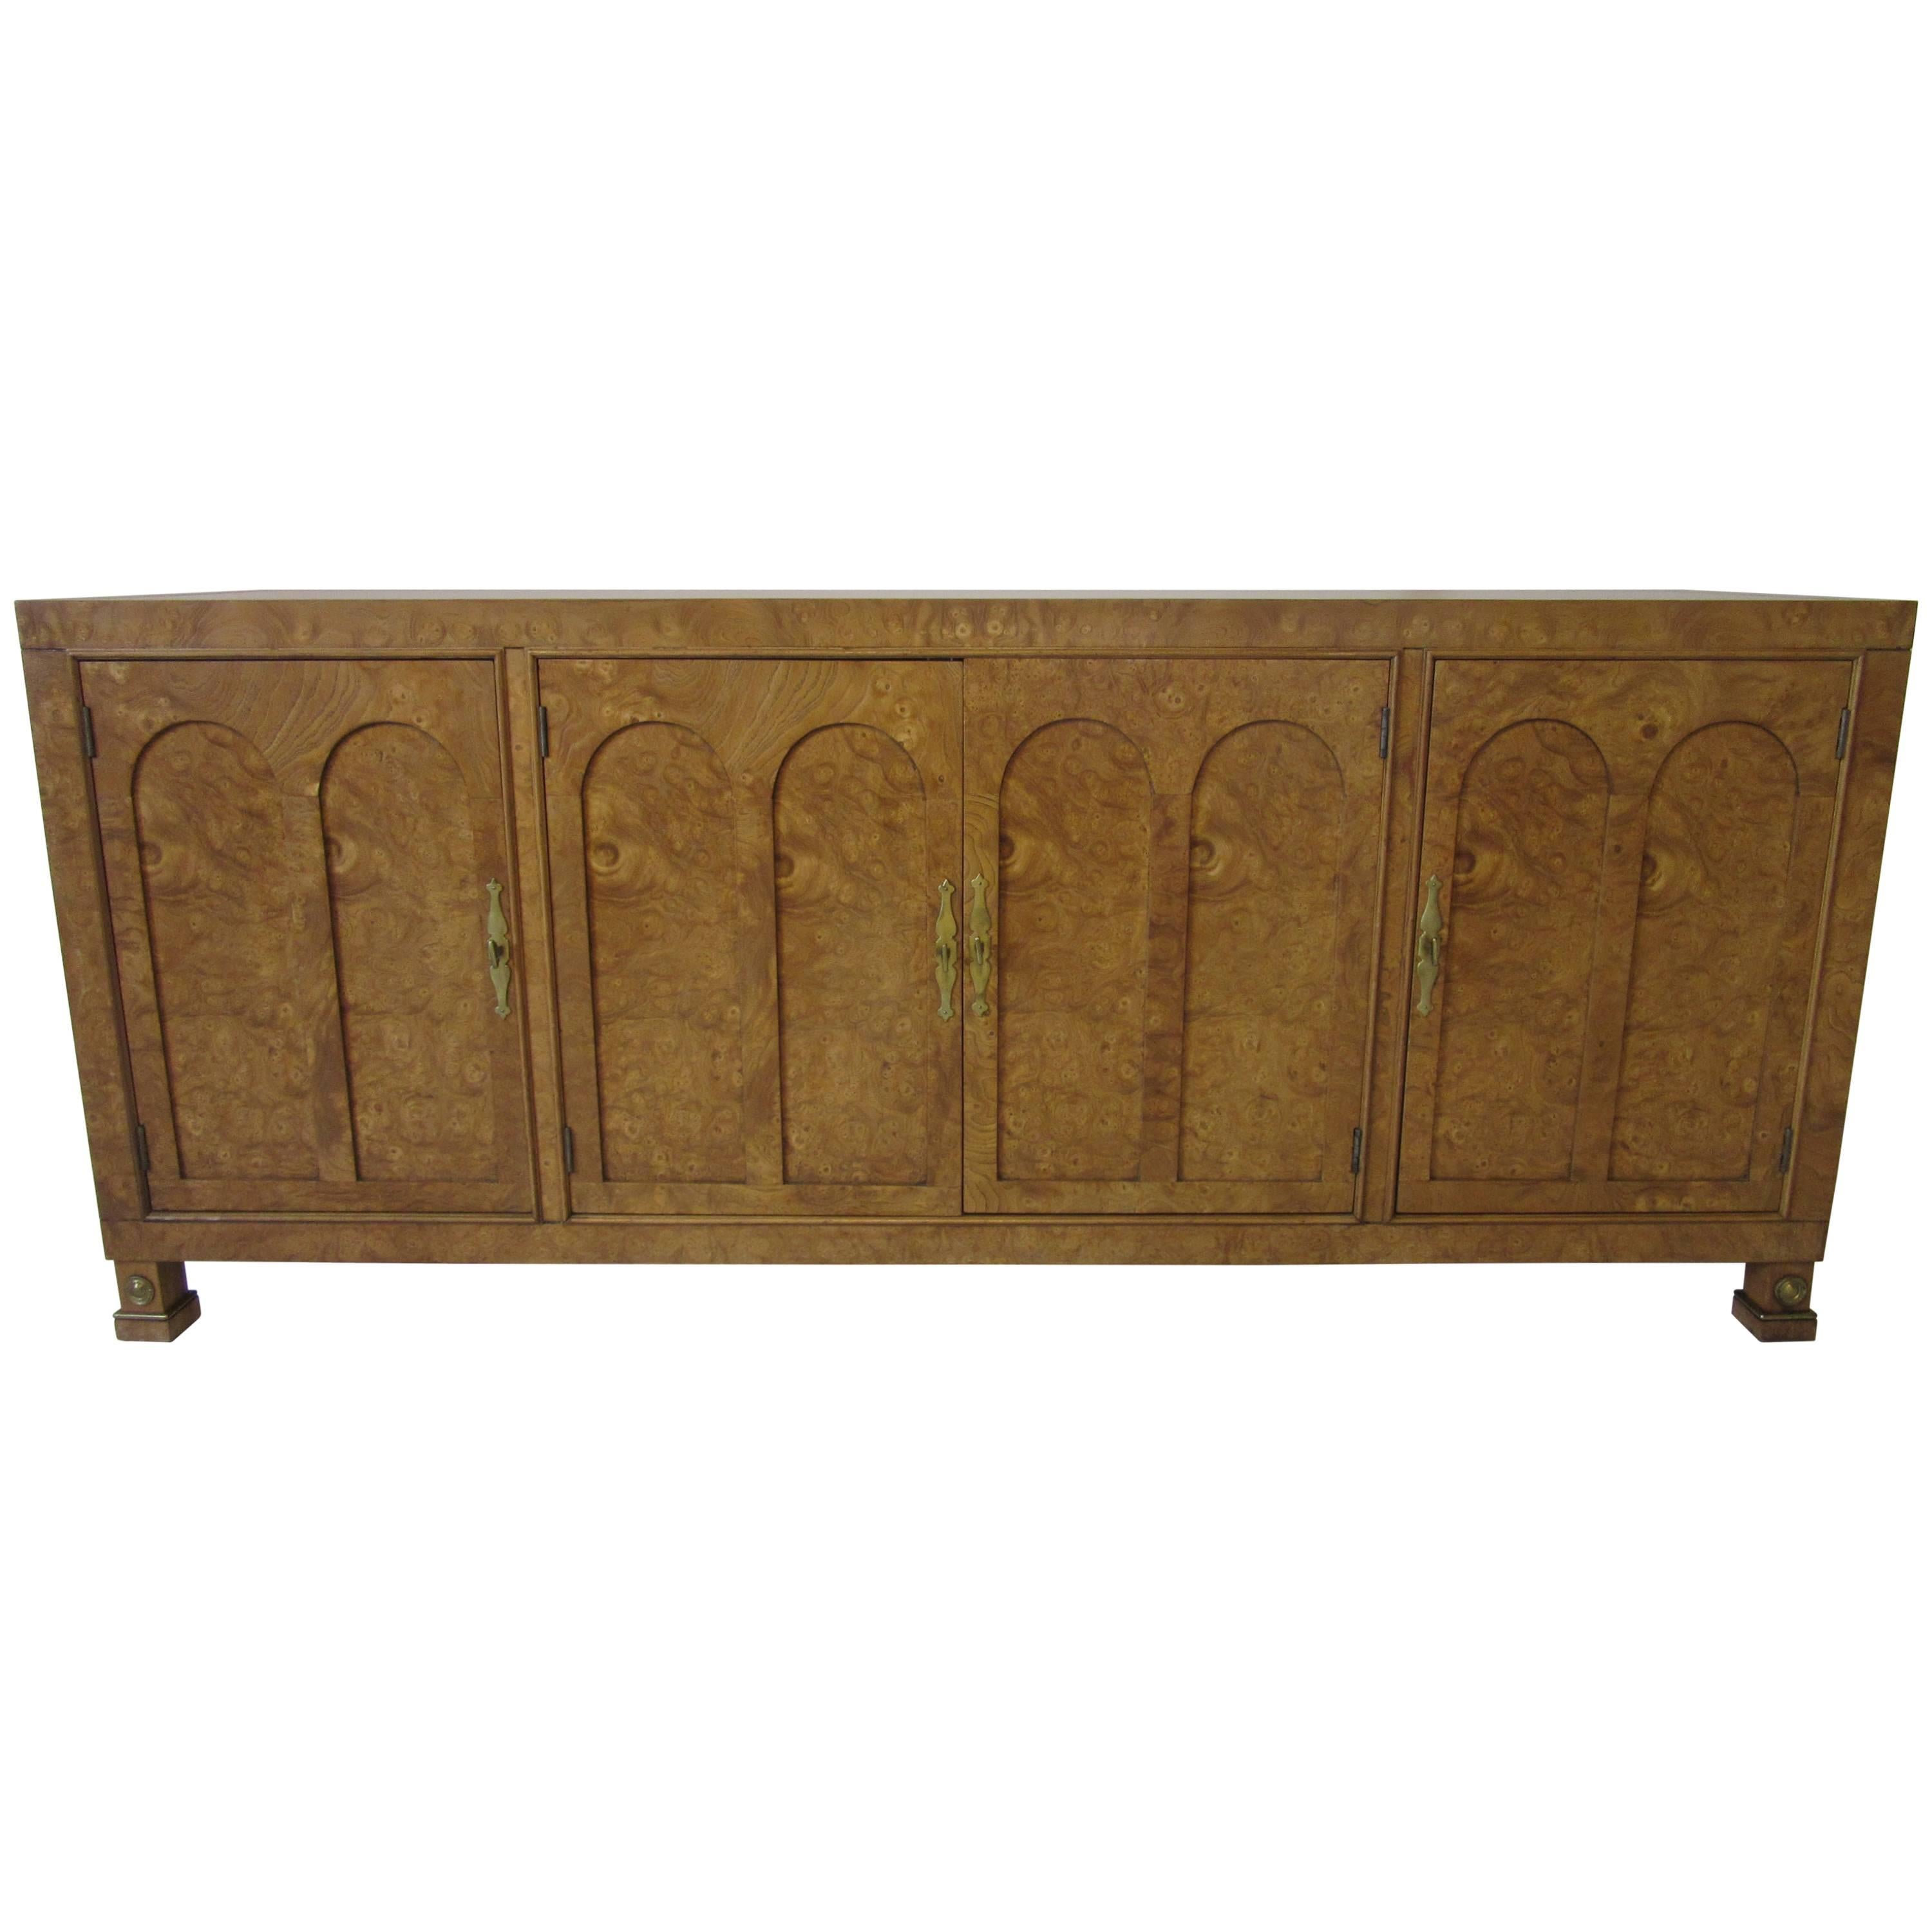 Mastercraft Burl Wood Credenza or Server in the Style of Hollywood Regency